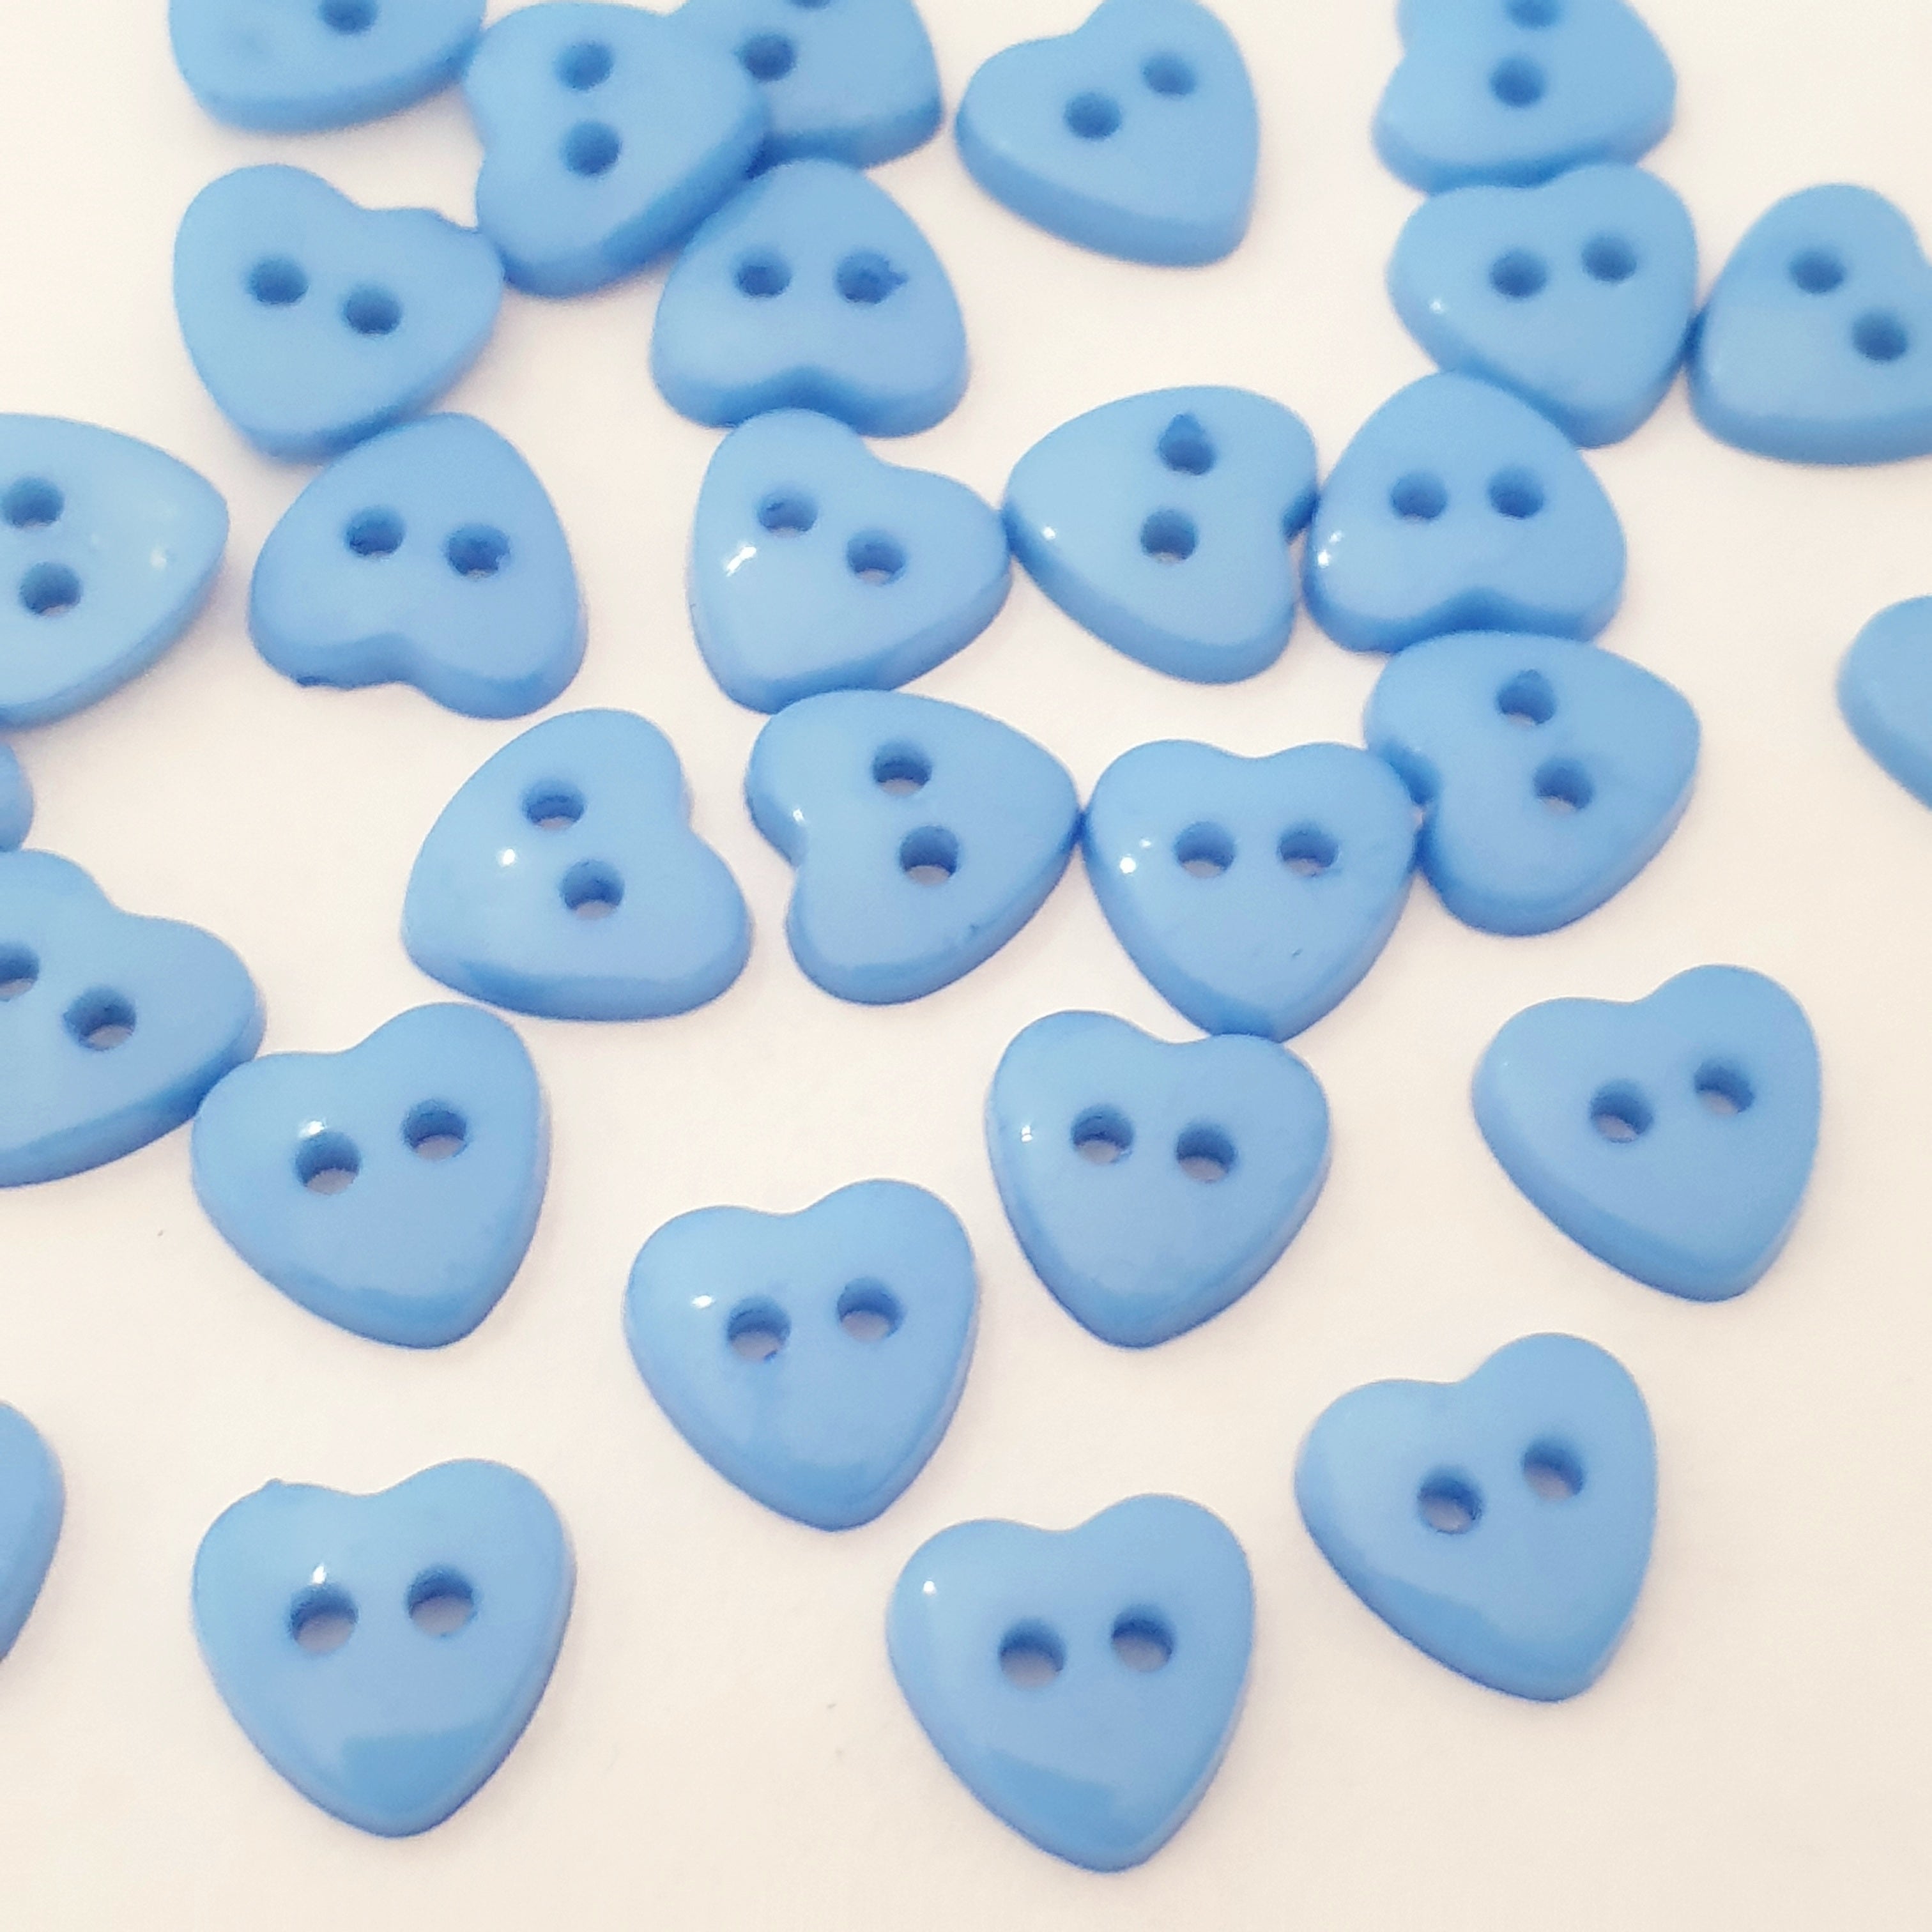 MajorCrafts 60pcs 13mm Light Blue Heart Shaped 2 Holes Resin Sewing Buttons